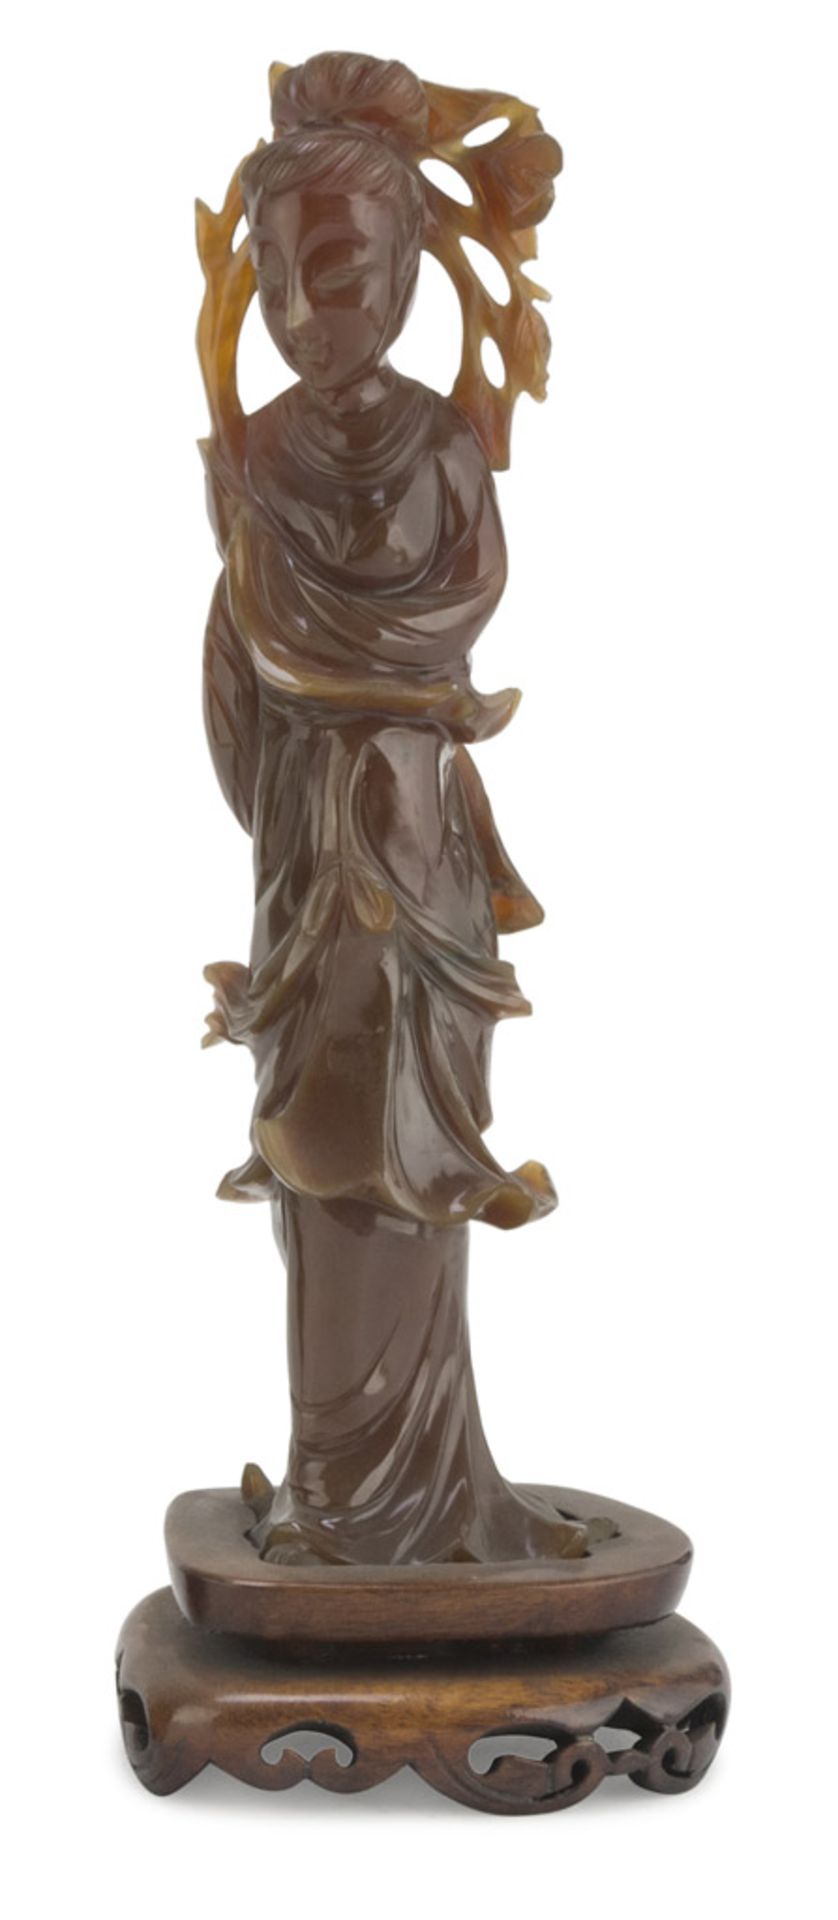 A CHALCEDONY SCULPTURE, CHINA 20TH CENTURY of Yang Guifei in the classical iconographic